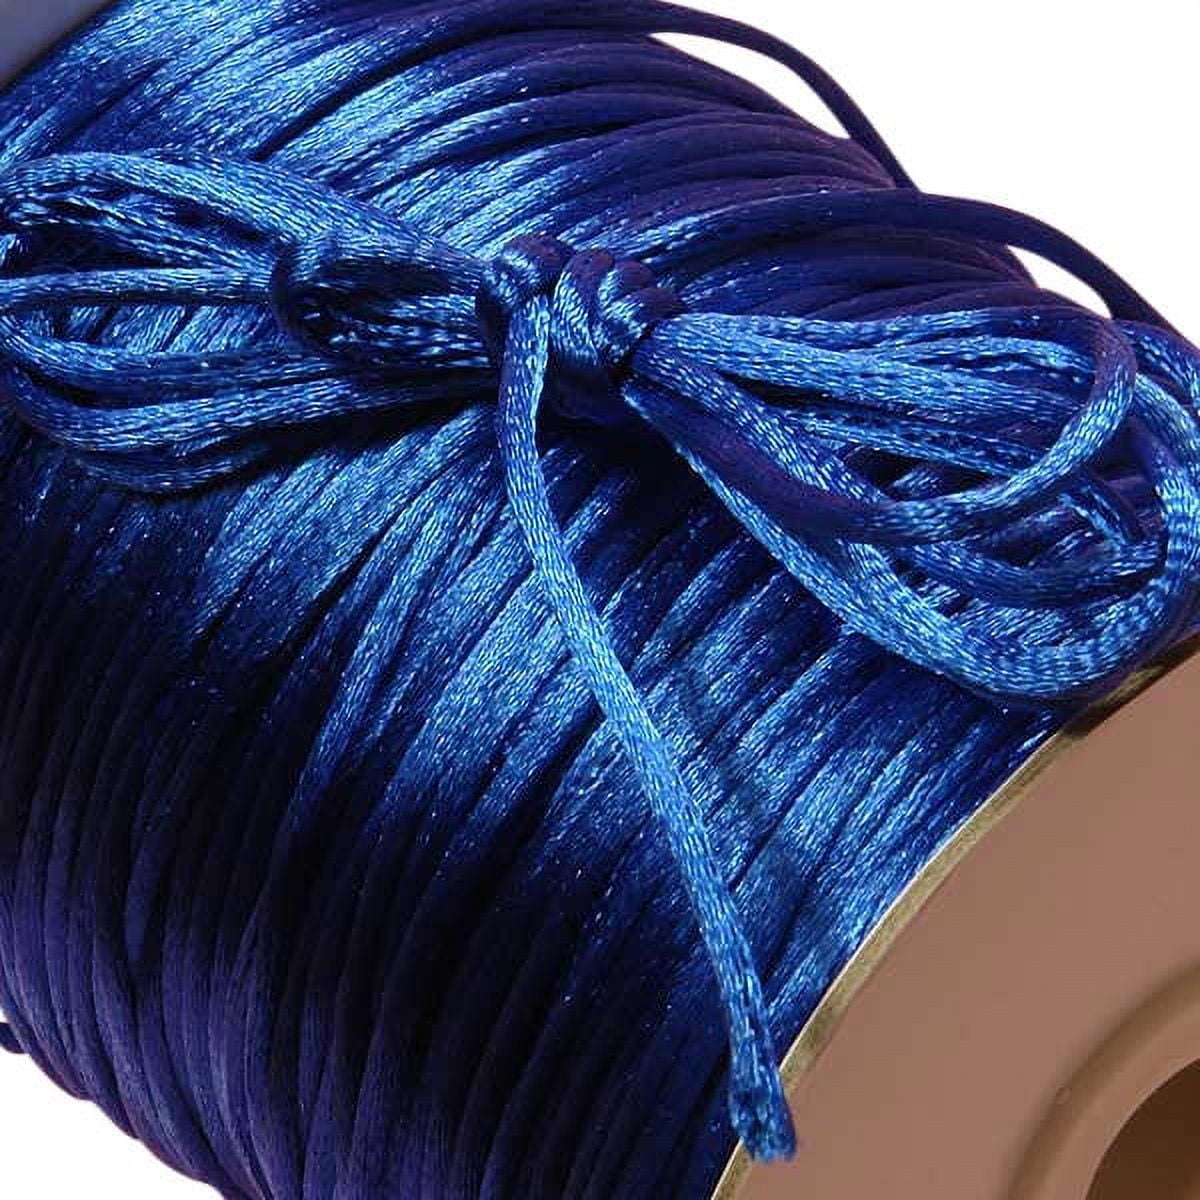 2mm Black Wrapped Silk Satin Cord, Soutache Wrapped Thread Cord, Artificial  Silk Cord, Rope Cord - 2 Yards/1,84m approx.(1 piece)